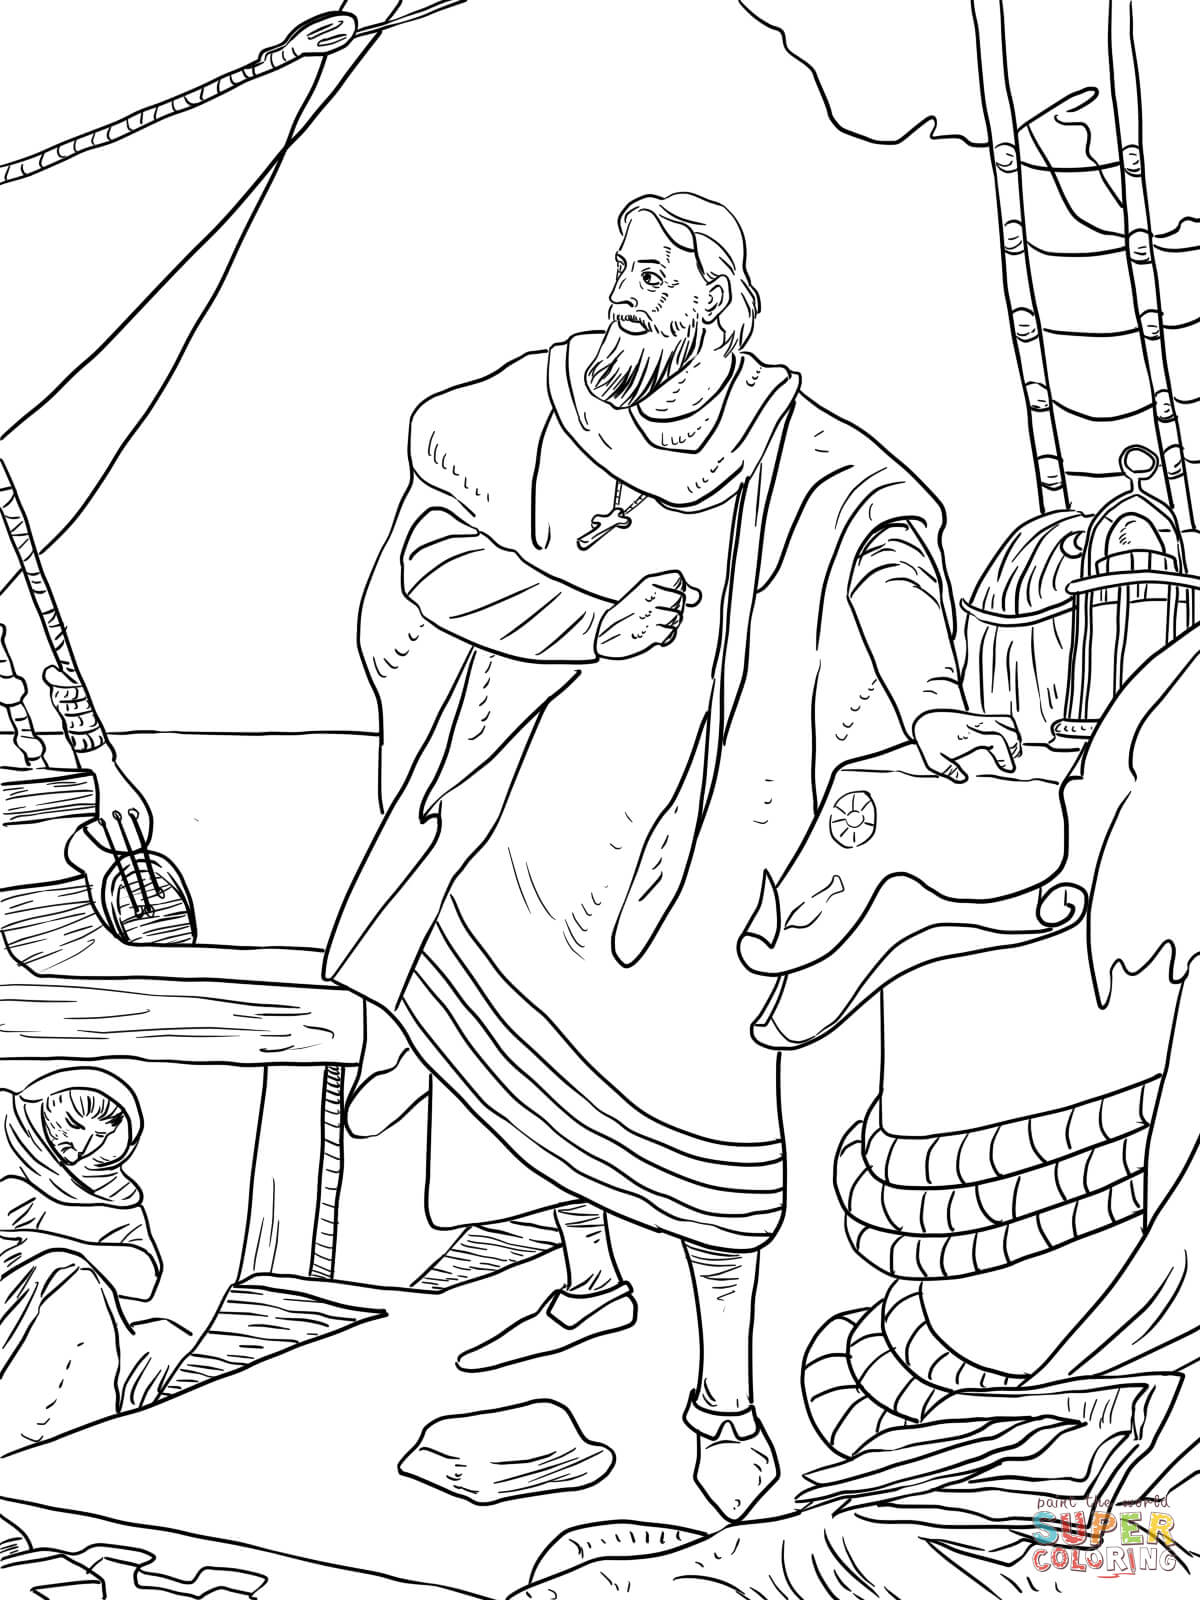 Christopher Columbus on the Santa Maria coloring page | Free Printable Coloring  Pages